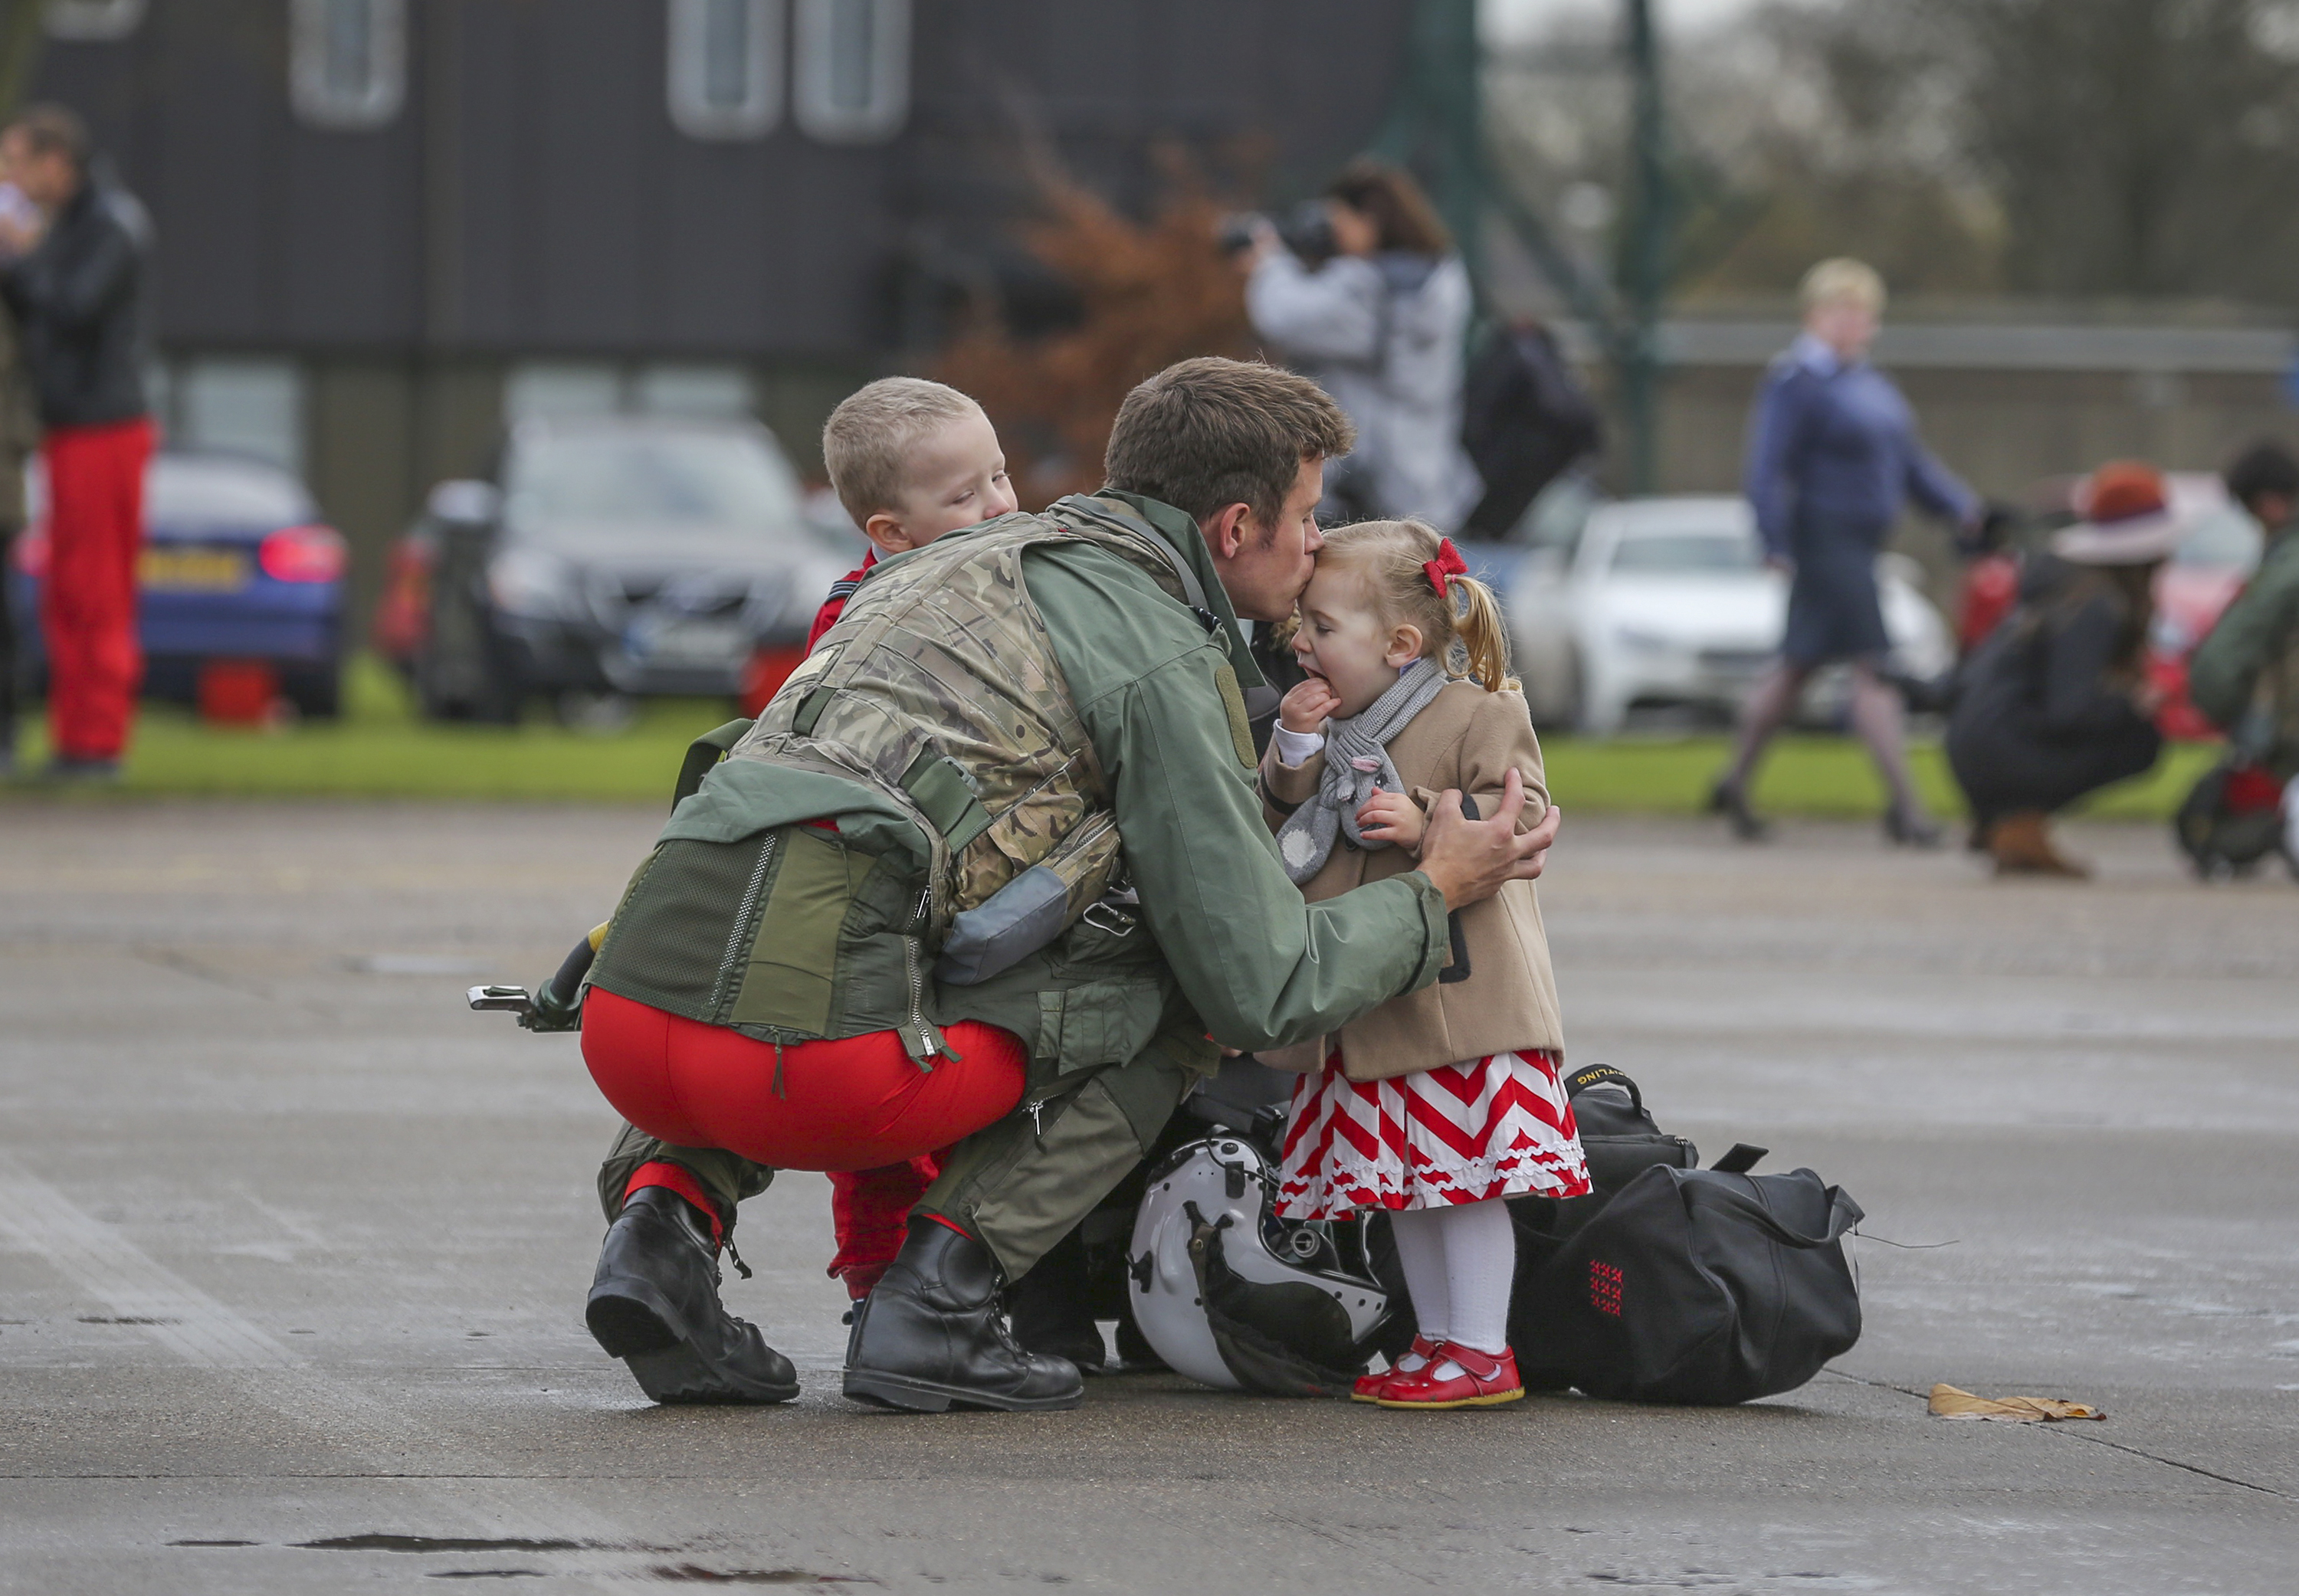 The Red Arrows arrive back at RAF Scampton after their tour of Asia Pacific and the Middle East. Friends and family of the team welcome them home. Flt Lt Tom Bould, Red 7, meets his wife and children after landing.